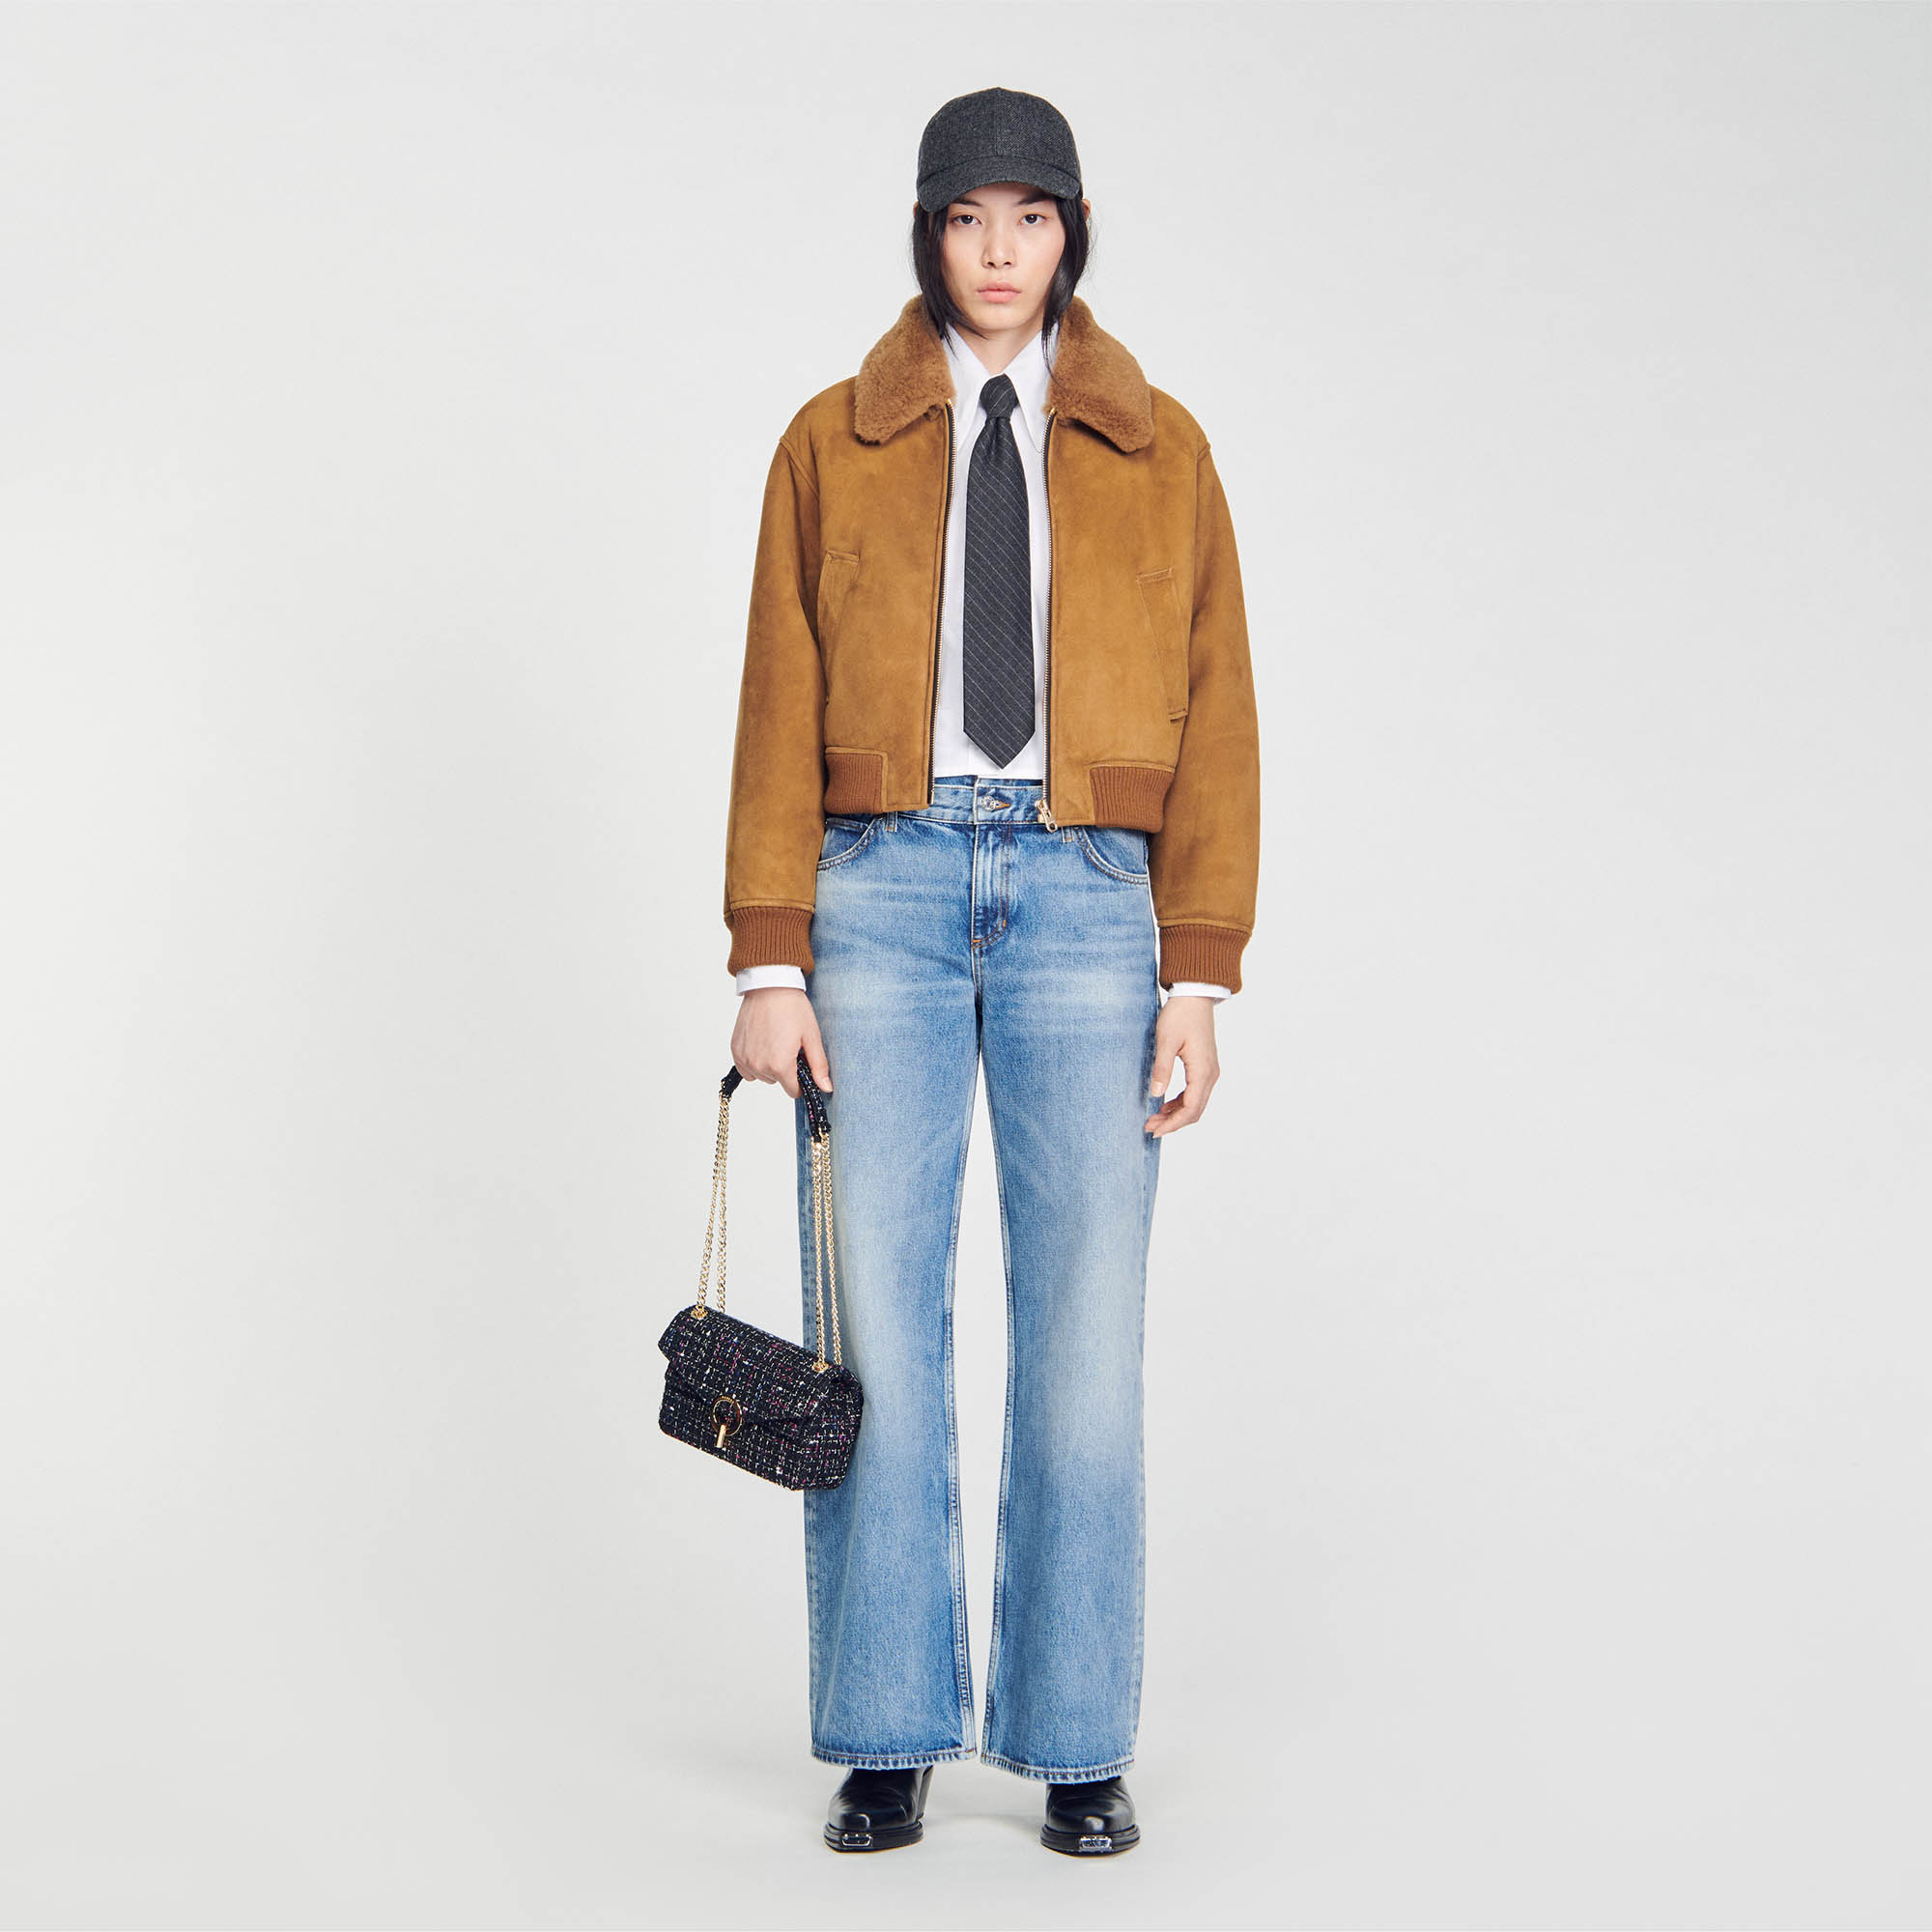 Sandro shearling Shearling bomber jacket with fur lining, oversized collar, long sleeves and zip fastening